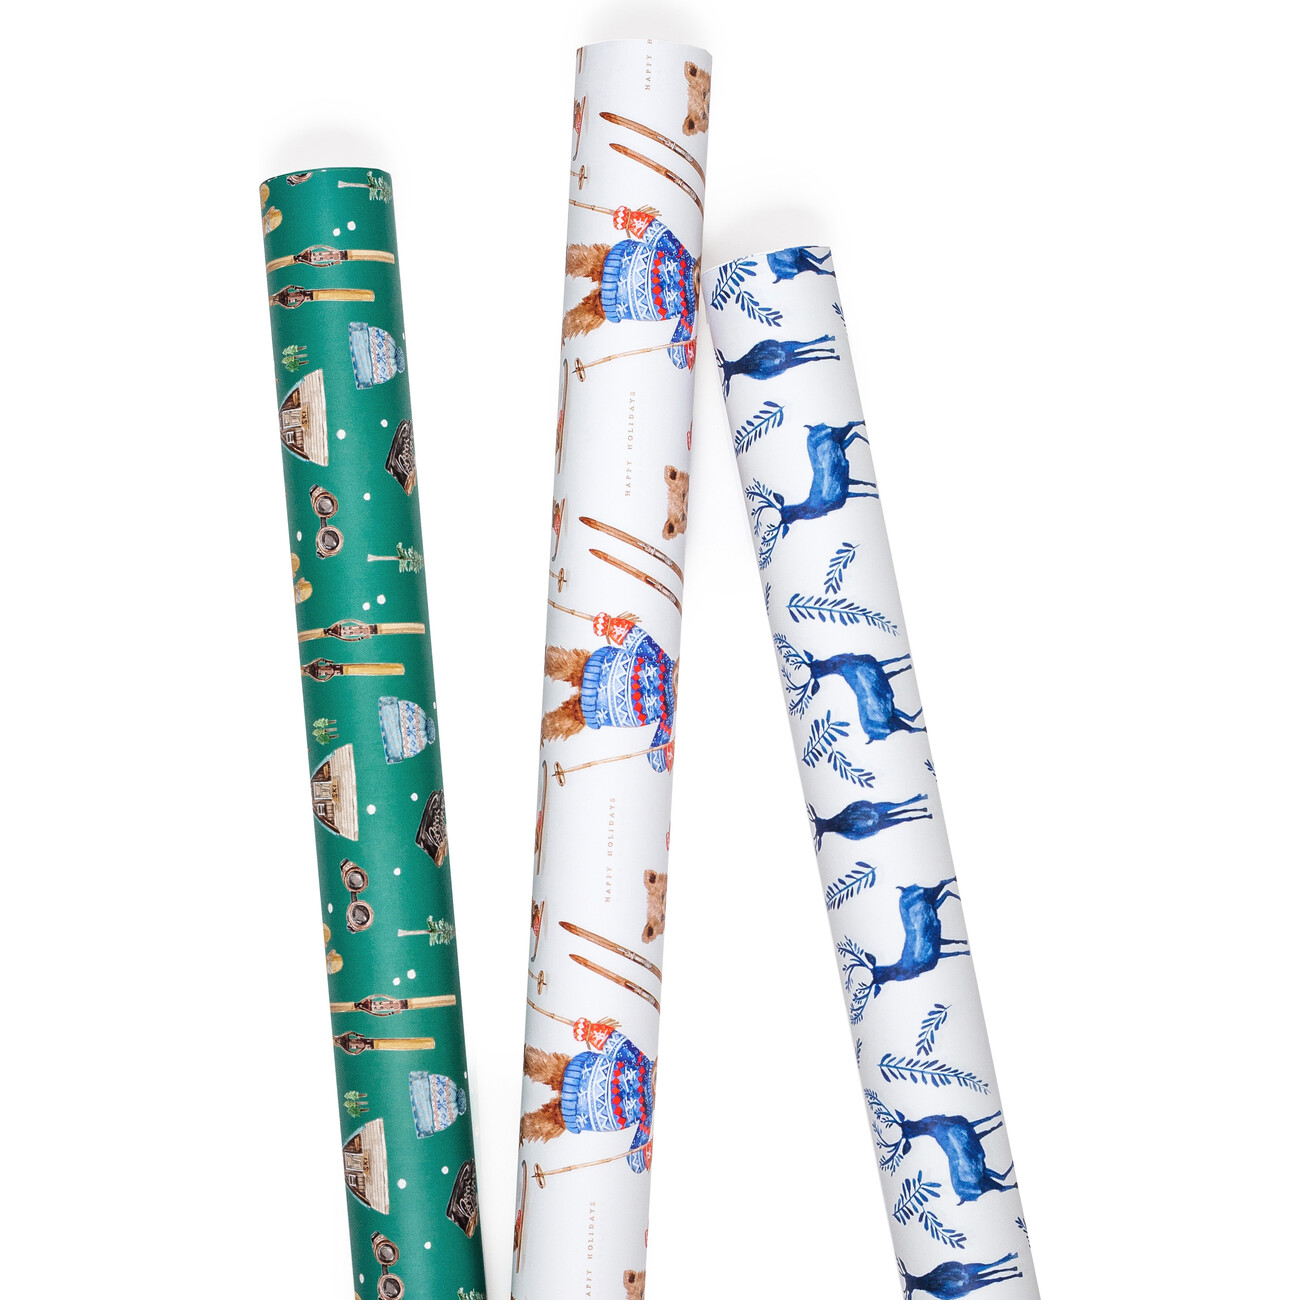 Lindquist Lane Winter Theme Wrapping Paper Sheets